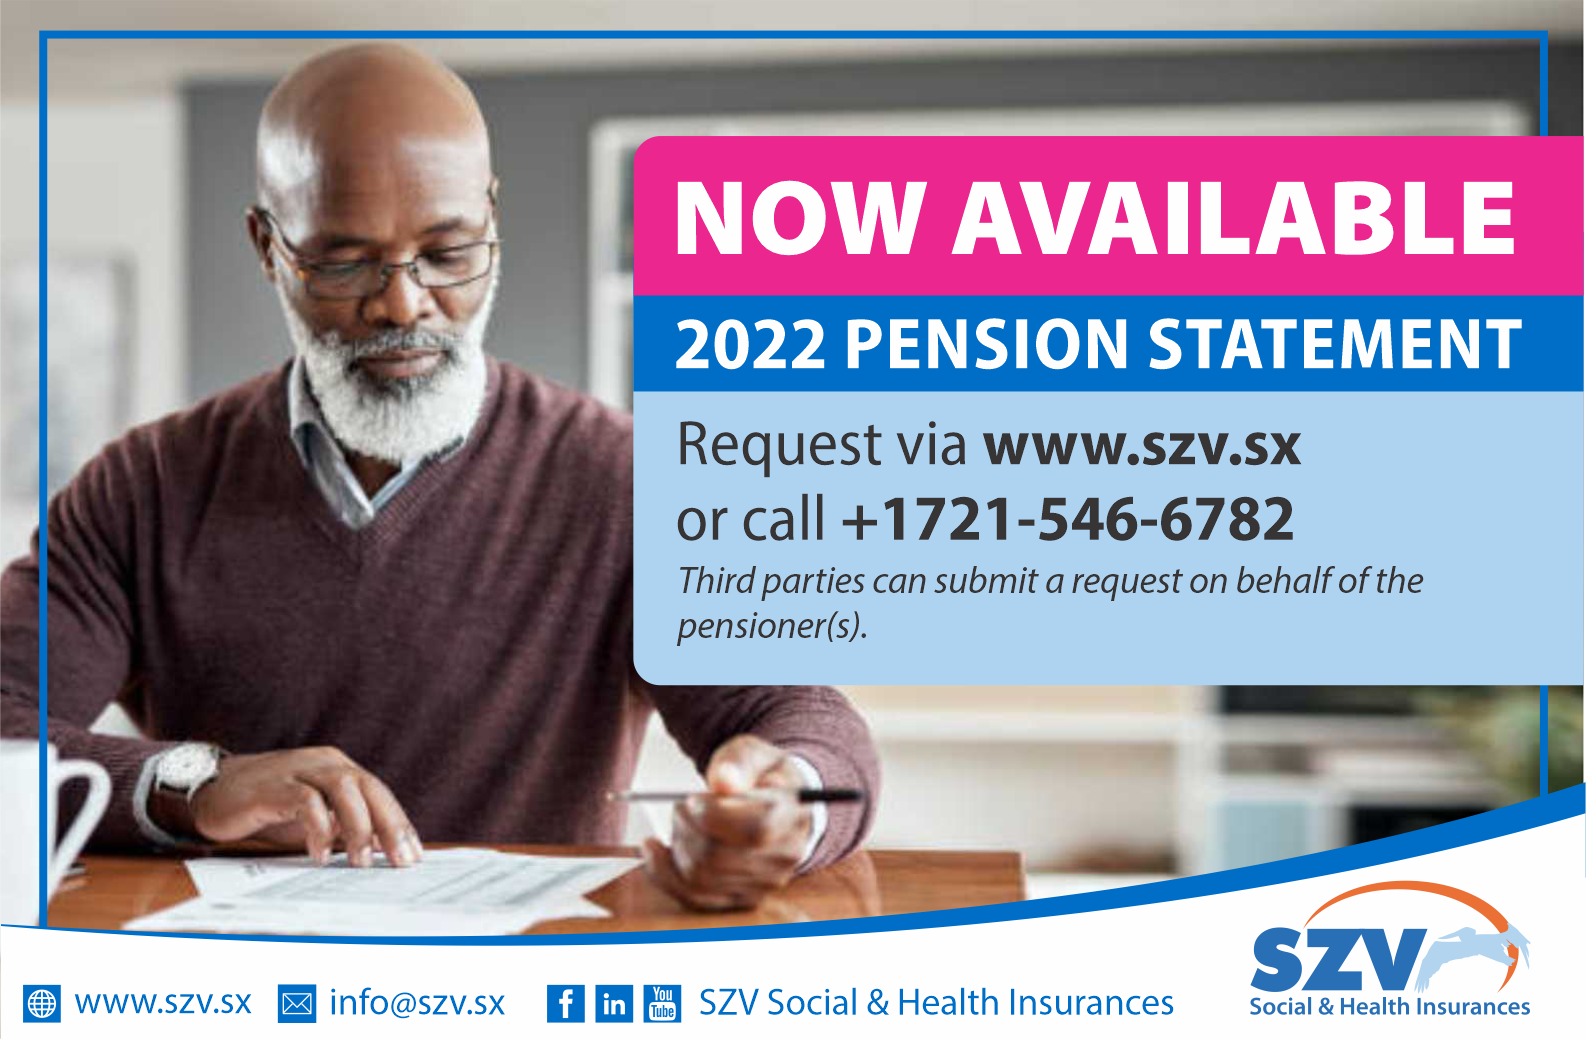 2022 Pension Statement Now Available